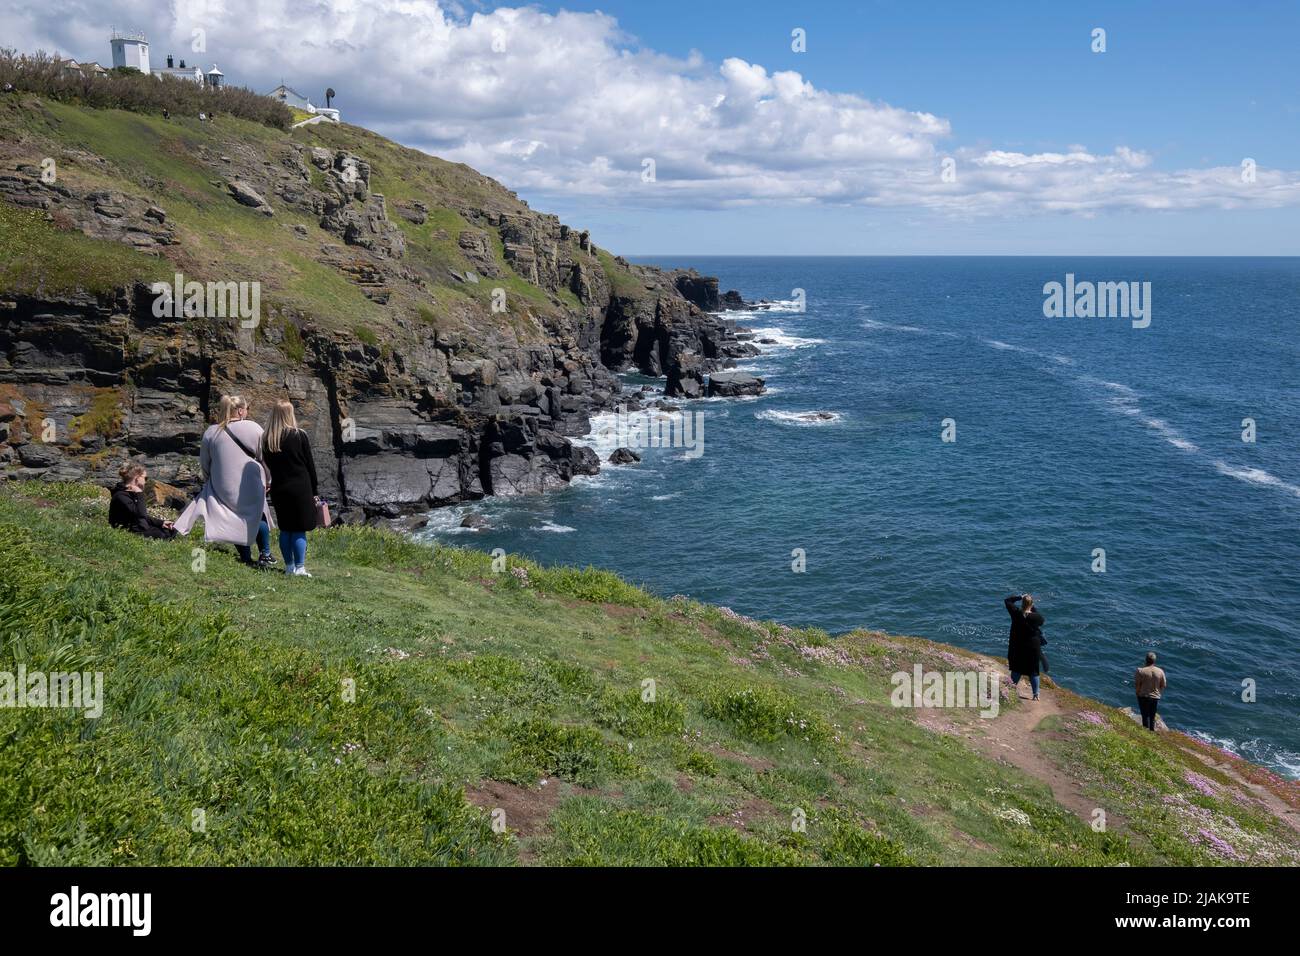 View of the most southerly point on the British Isles, Lizard Point in Cornwall, England. Stock Photo